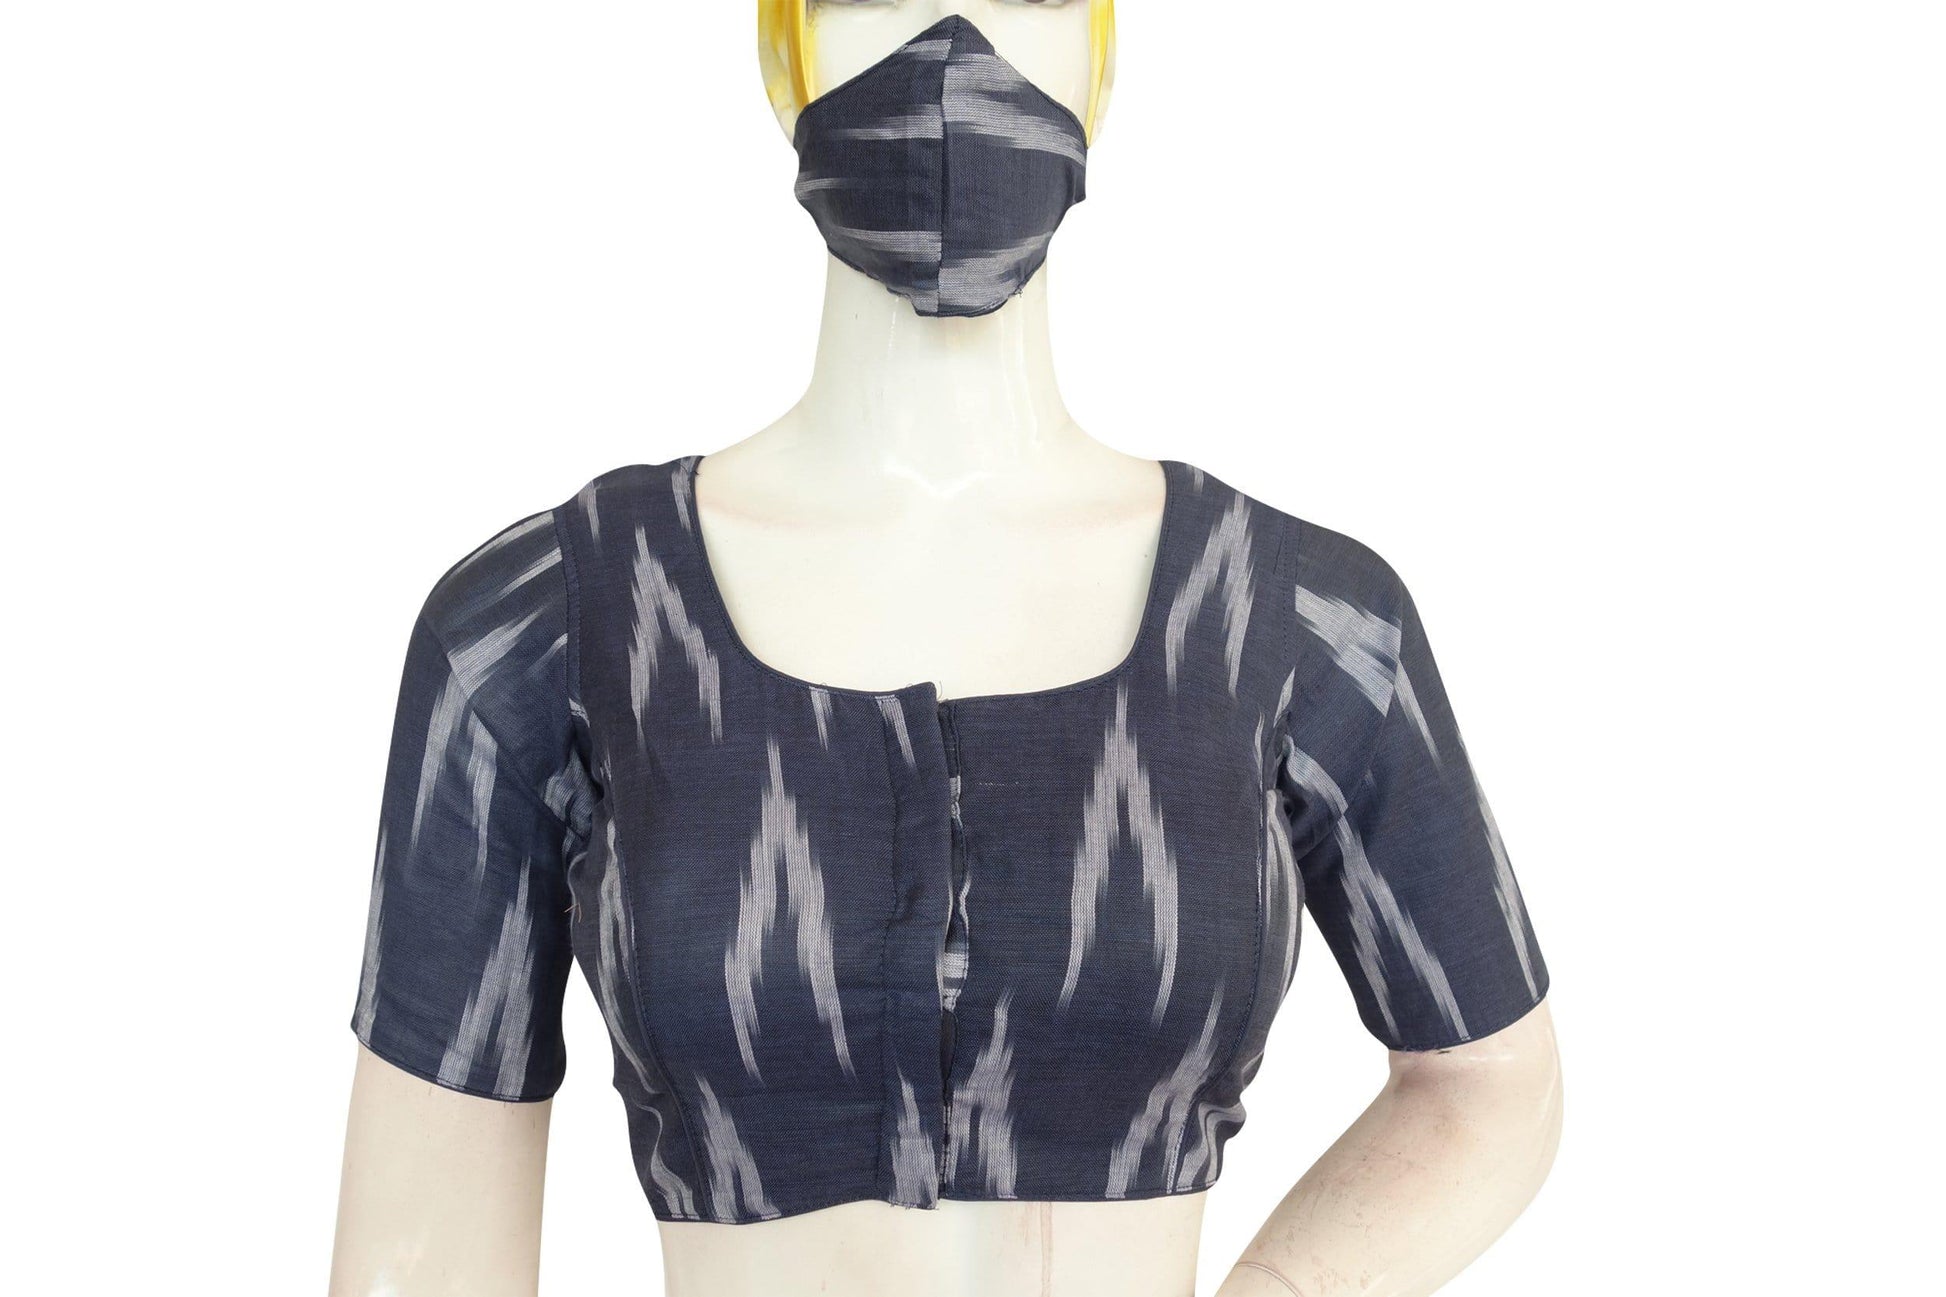 Stay fashionable and protected with our Navy Blue Ikkat Readymade Blouse, complete with a matching face mask for added safety and style. Elevate your look while staying stylishly safe.